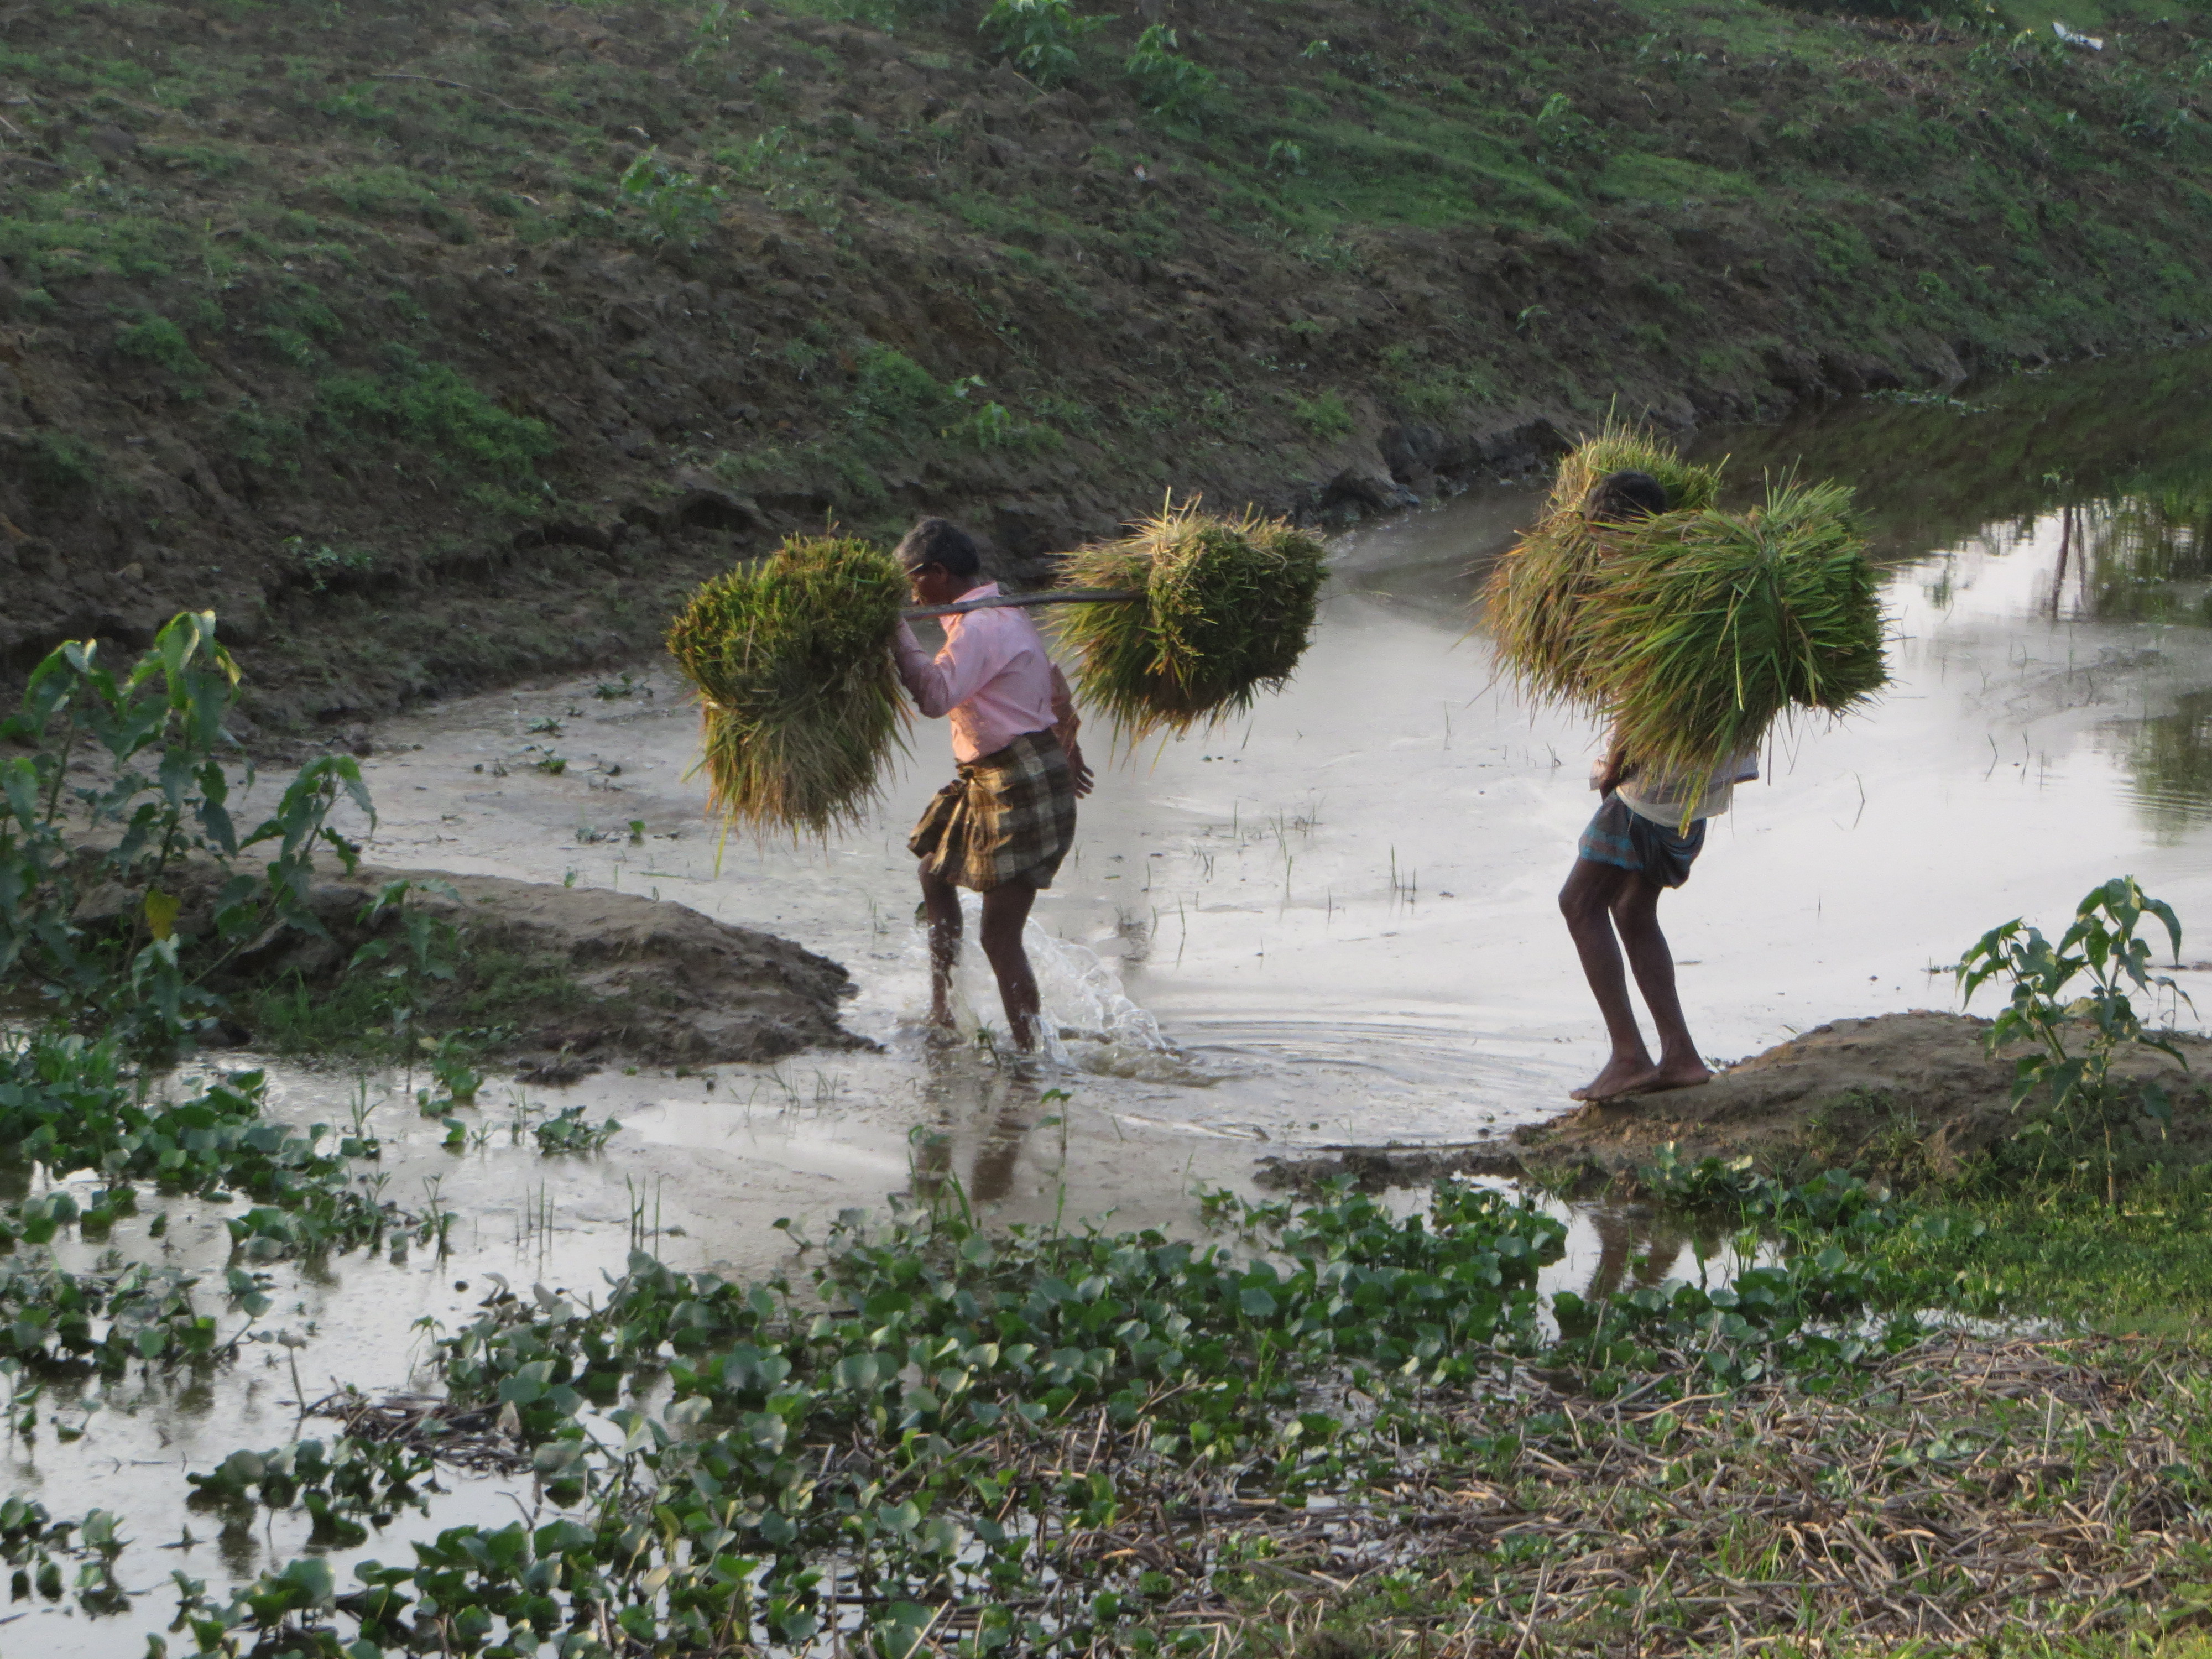 Framers carry the rice crop home